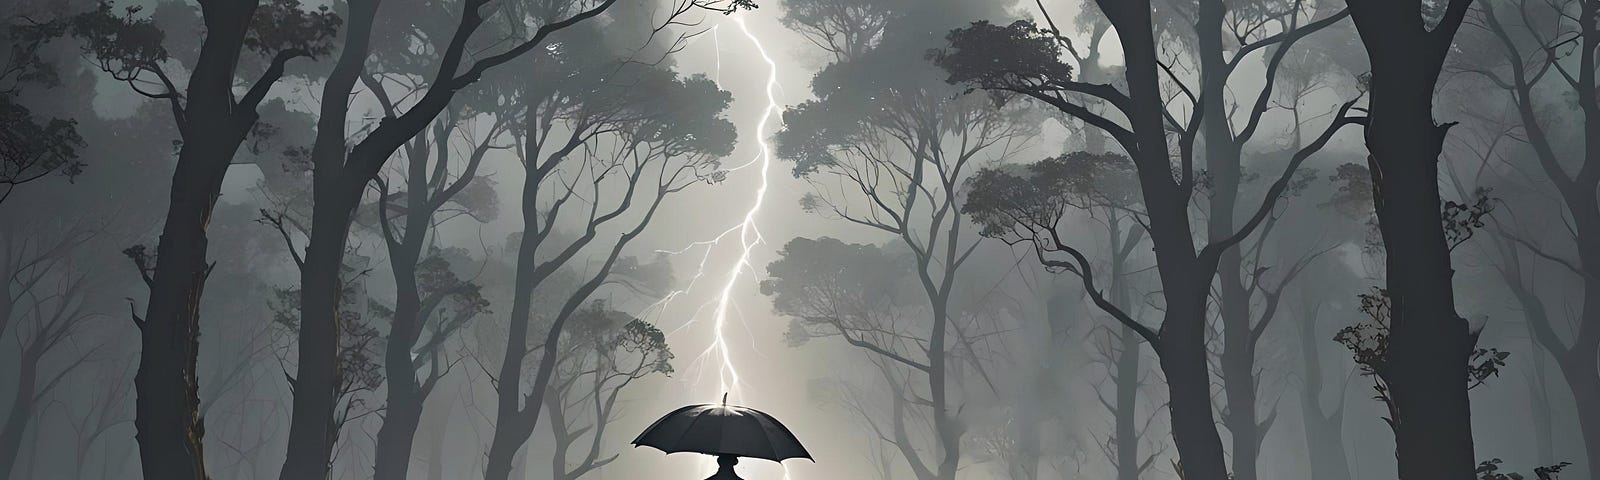 A silhouetted man with an umbrella walks a forest path towards a single streak of lightning